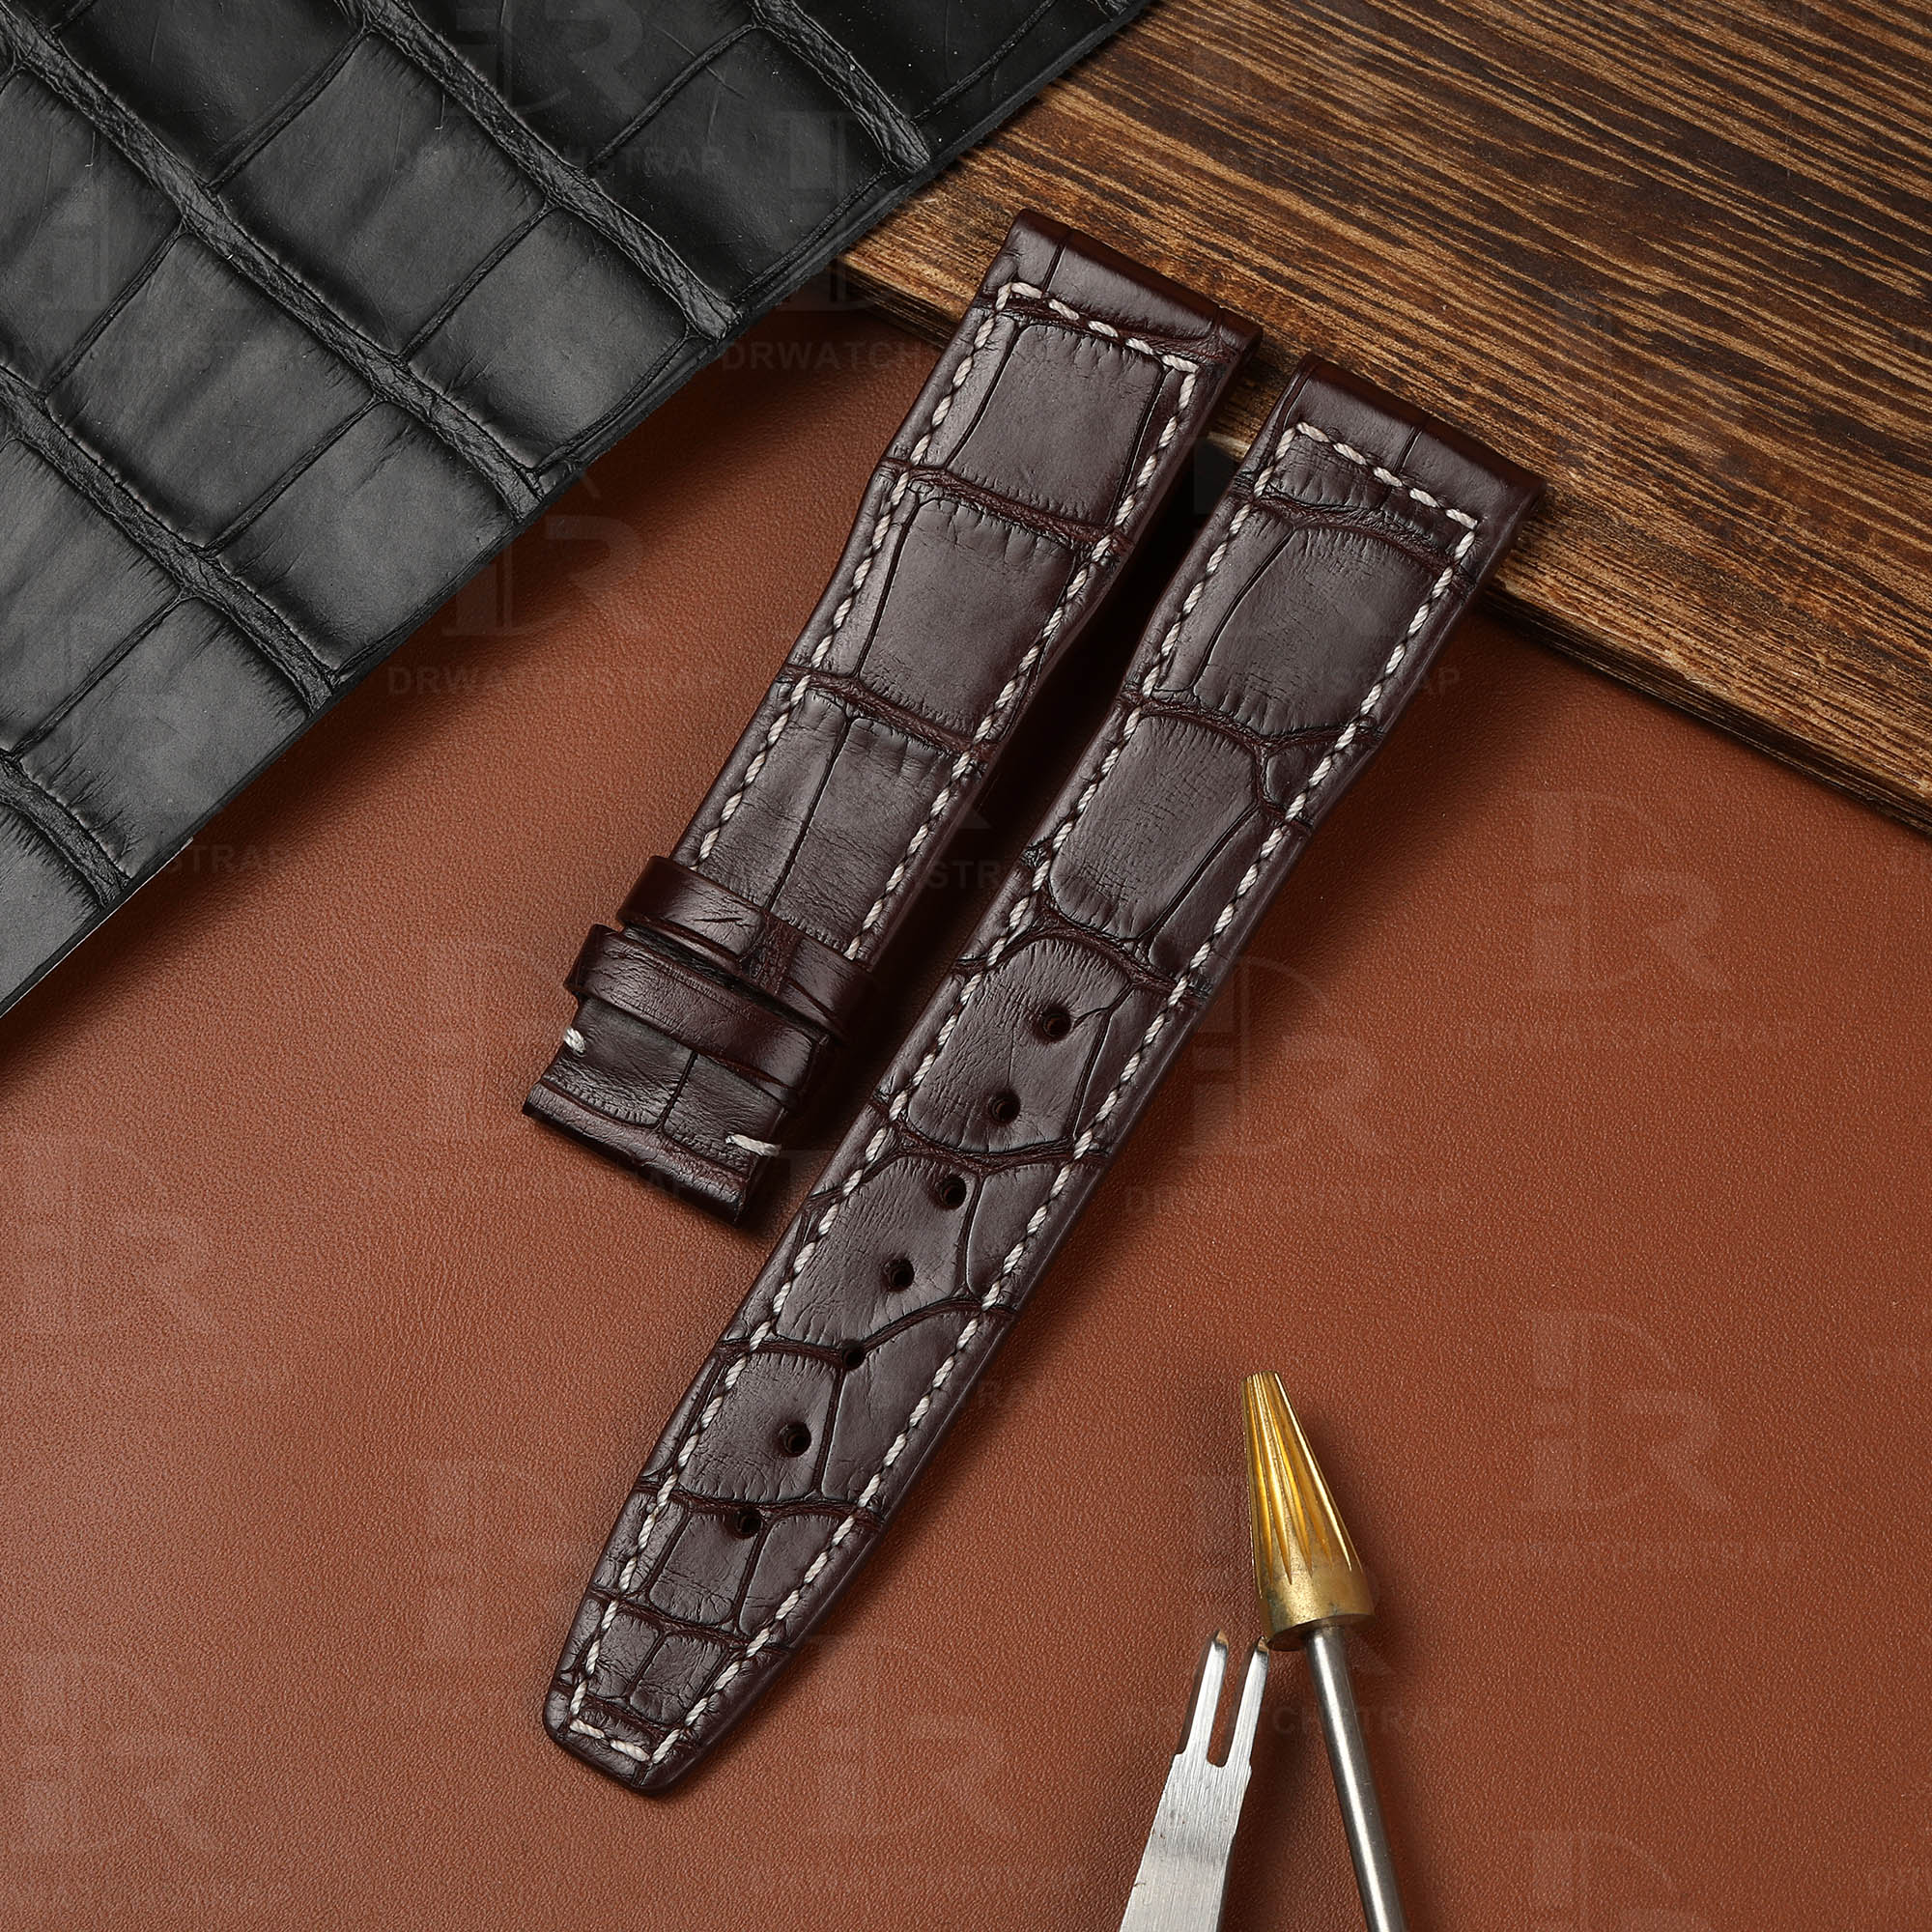 Custom replacement brown leather watch strap for IWC Big Pilot